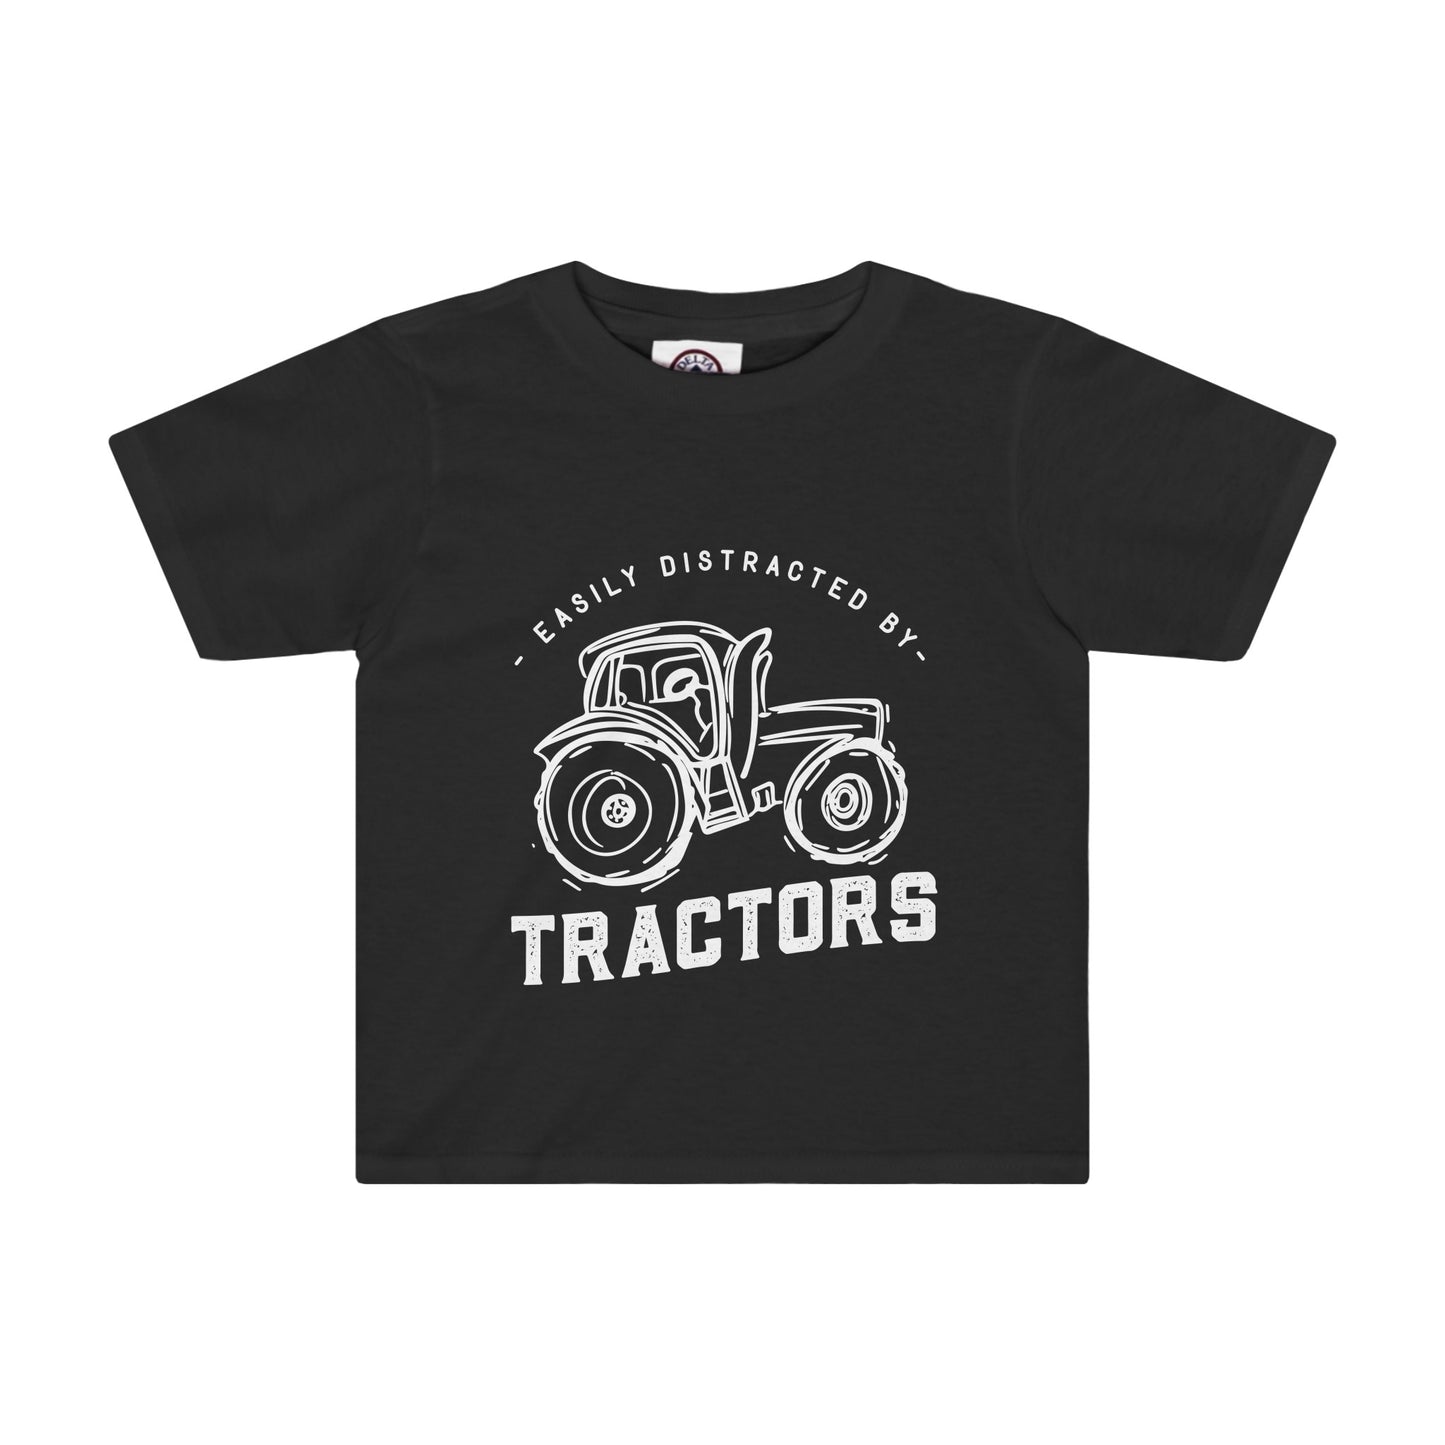 Easily distracted by tractors